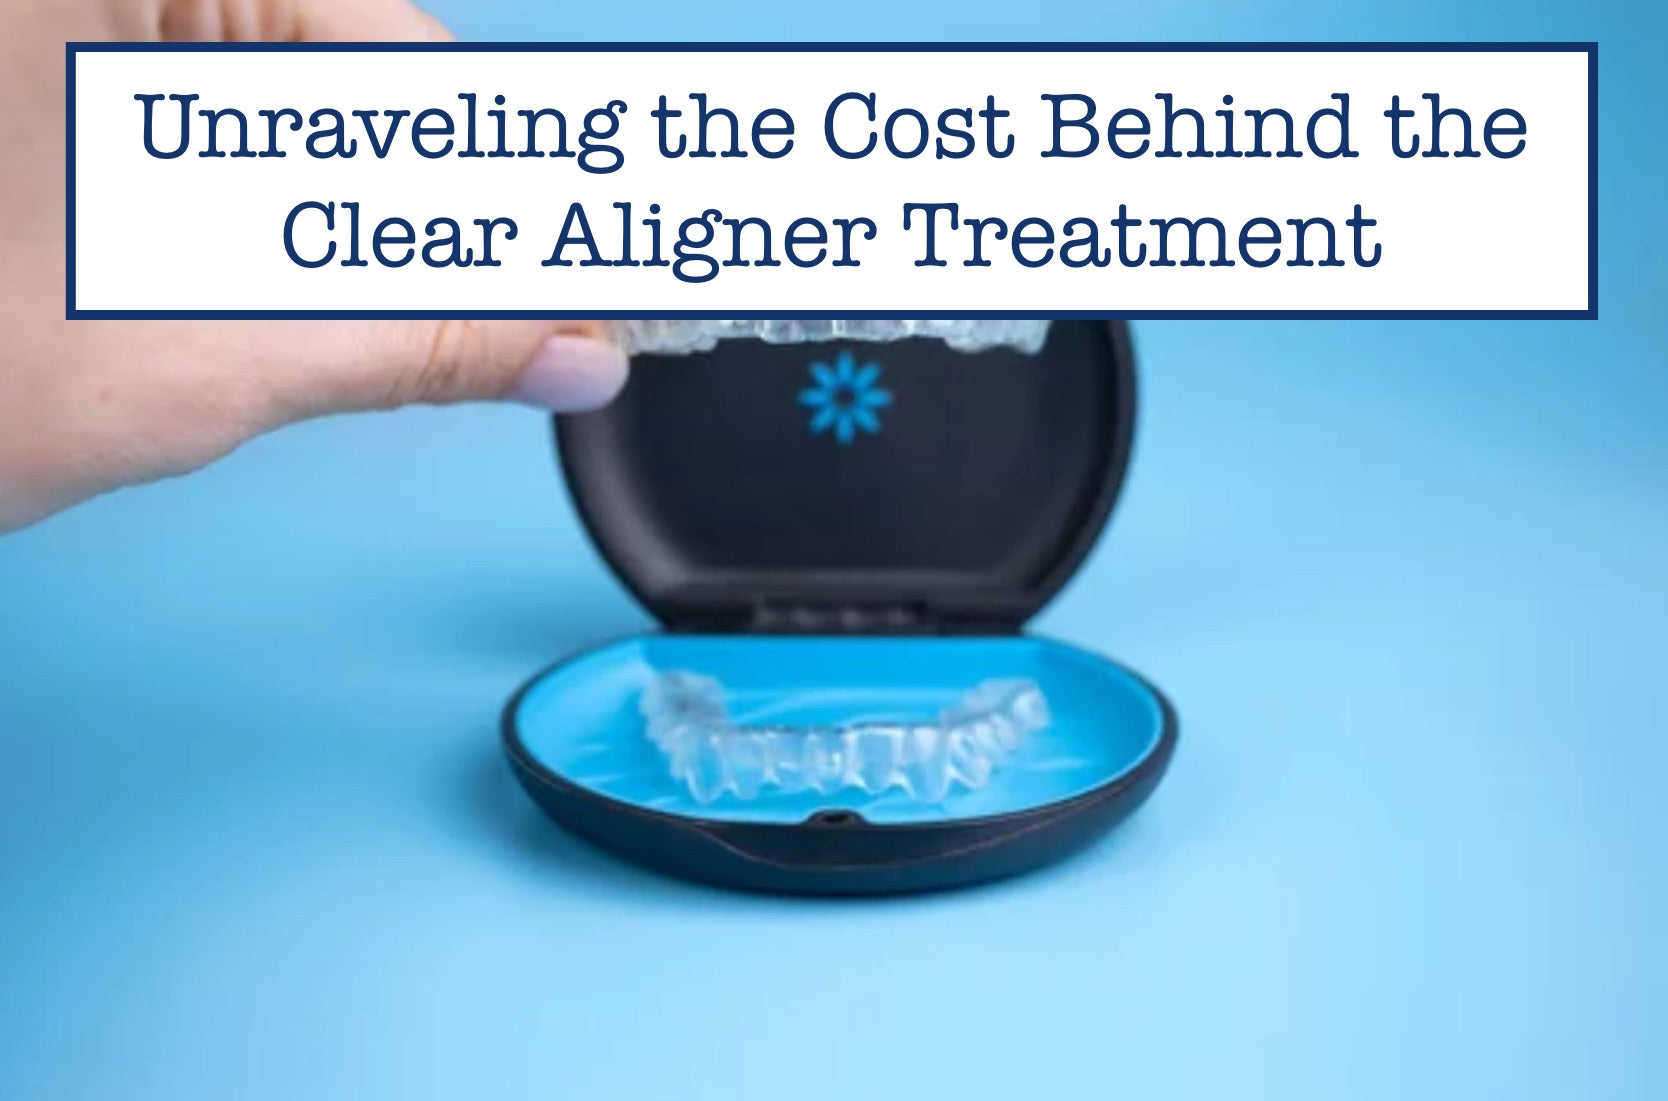 Unraveling the Cost Behind the Clear Aligner Treatment